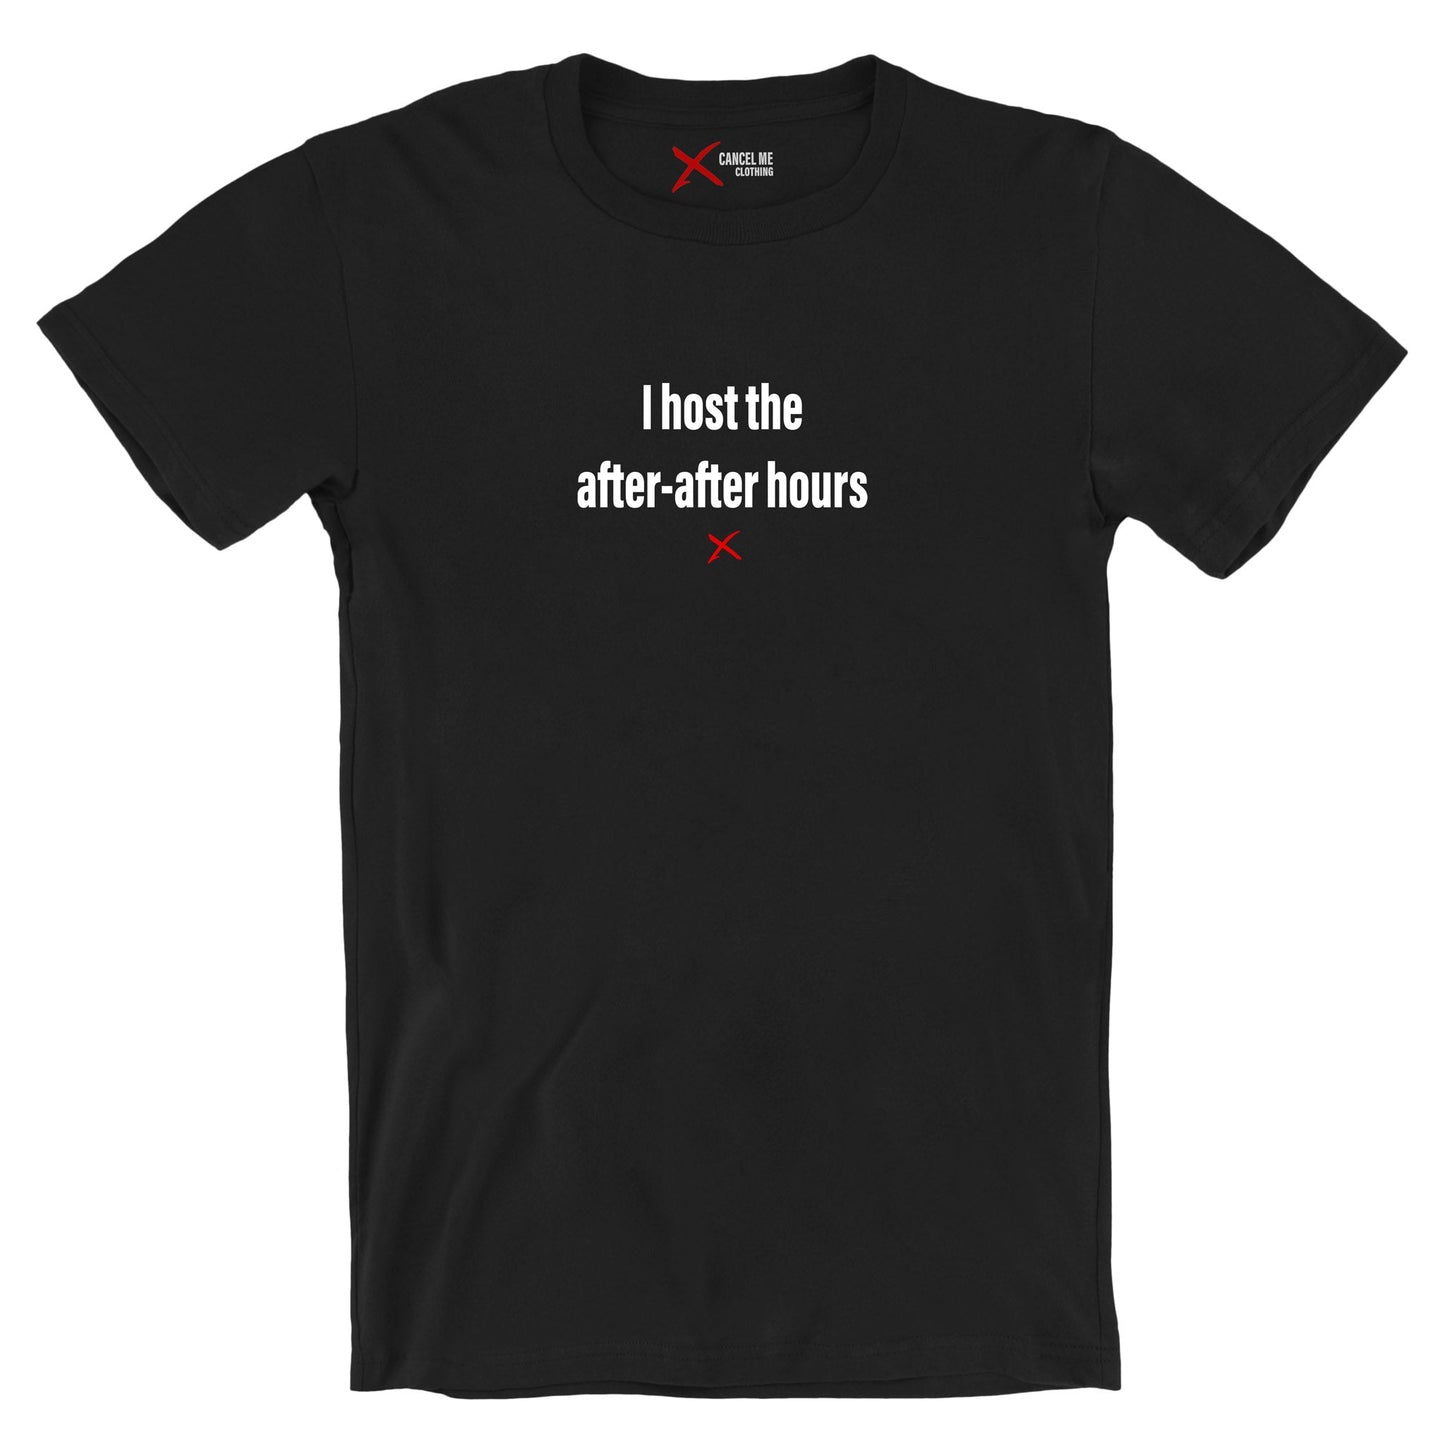 I host the after-after hours - Shirt